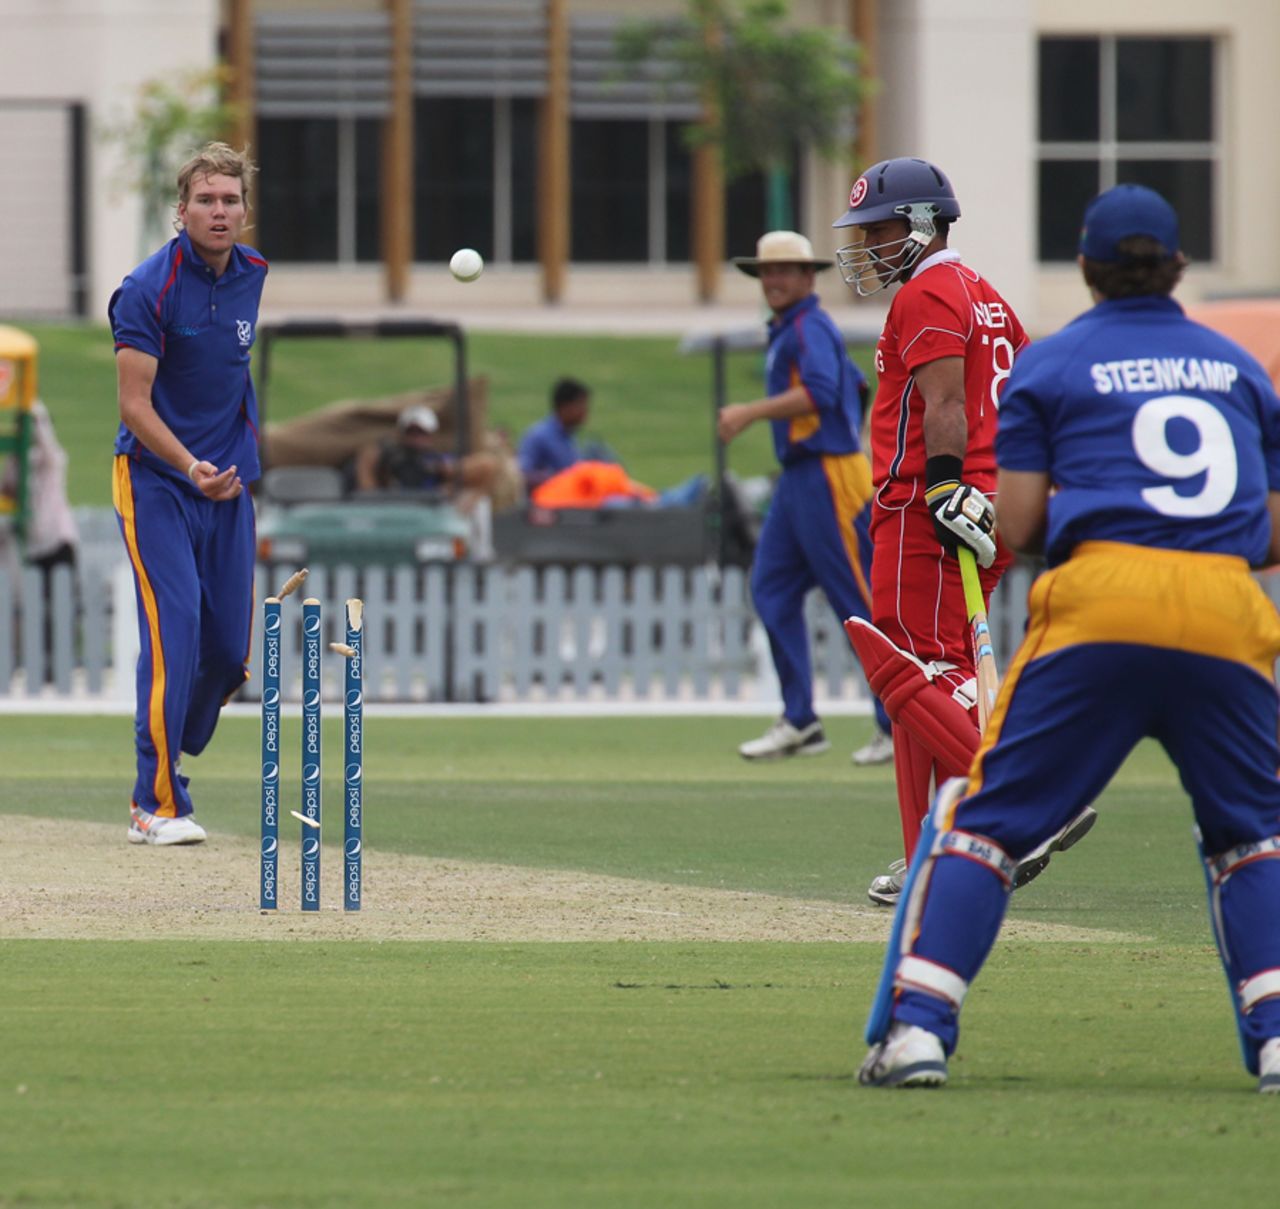 Namibia's Christi Viljoen fires the ball back at the stumps, breaking one of them against Hong Kong at the ICC WCL2 in Dubai on 14th April 2011